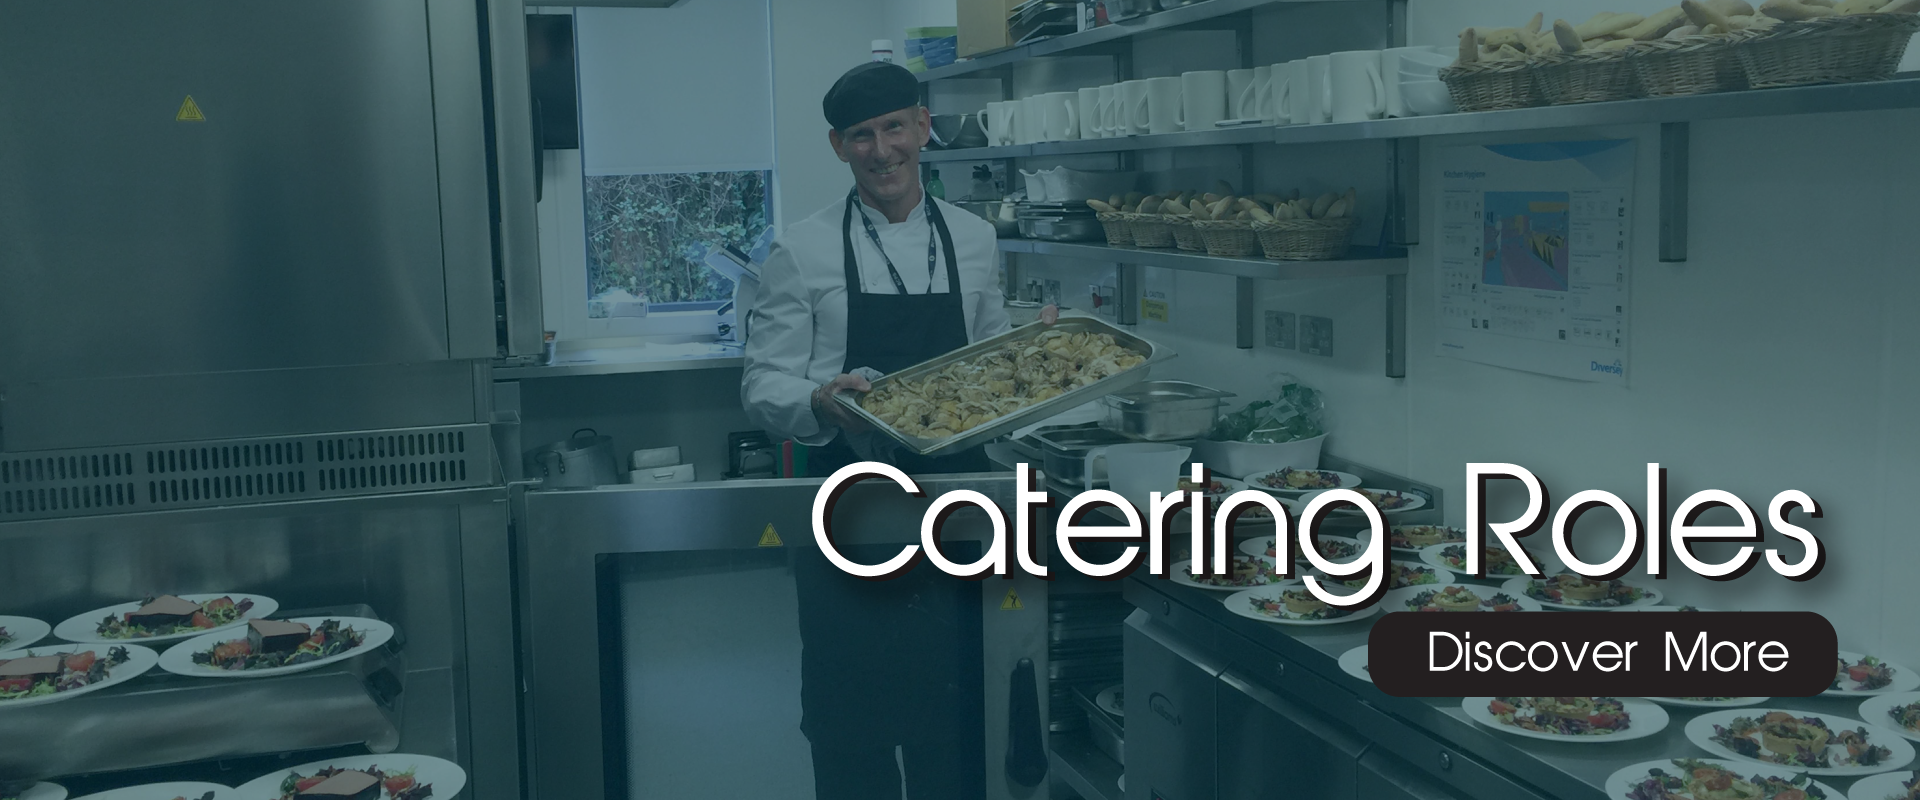 Catering roles Banner